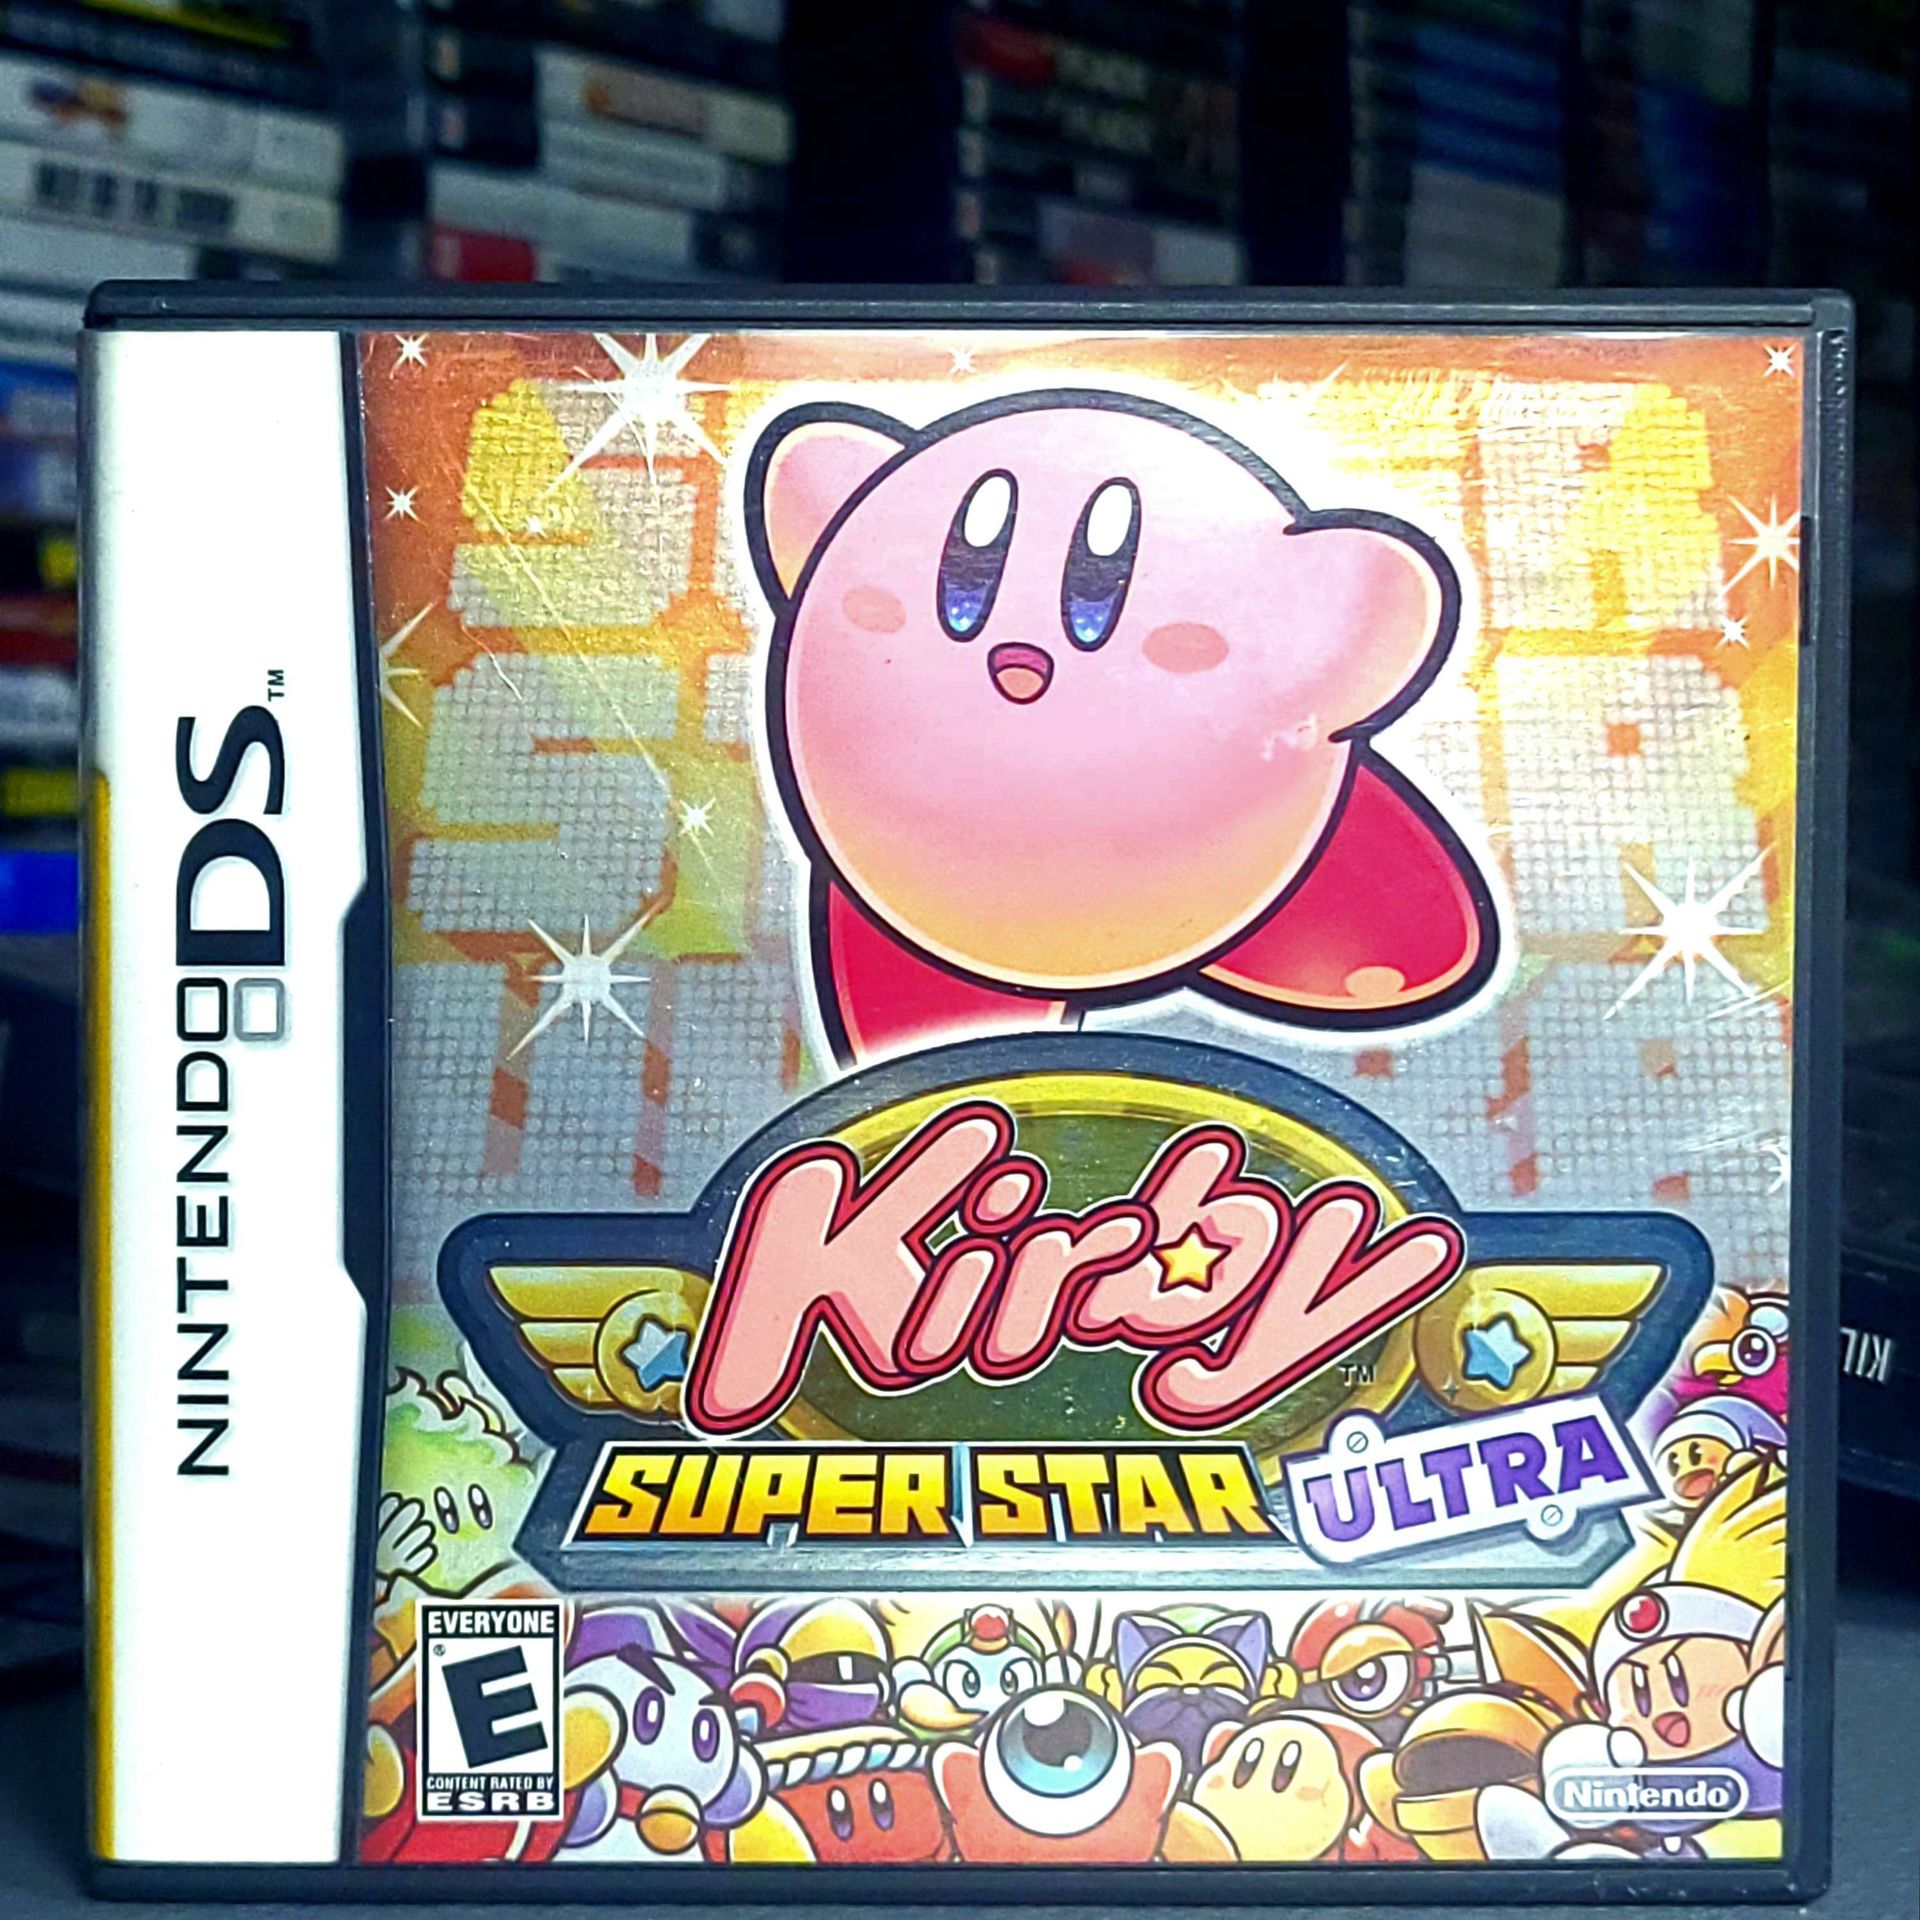 Kirby Super Star Ultra (Nintendo DS, 2008) *TRADE IN YOUR OLD GAMES/TCG/COMICS/PHONES/VHS FOR CSH OR CREDIT HERE*